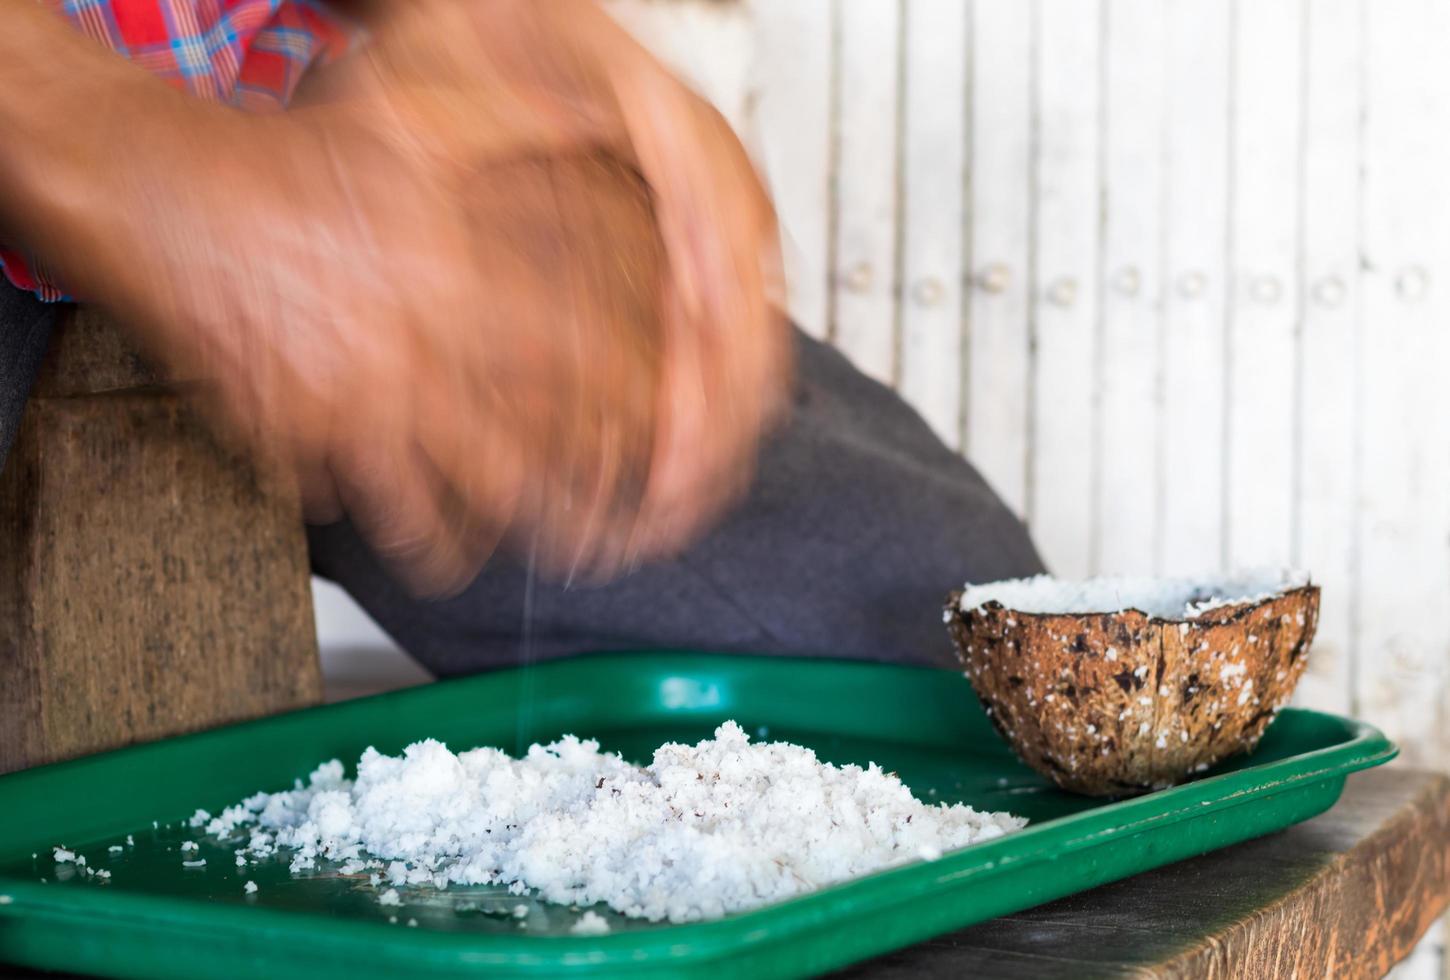 Elderly man with fingers to scrape the coconut into the tray. photo